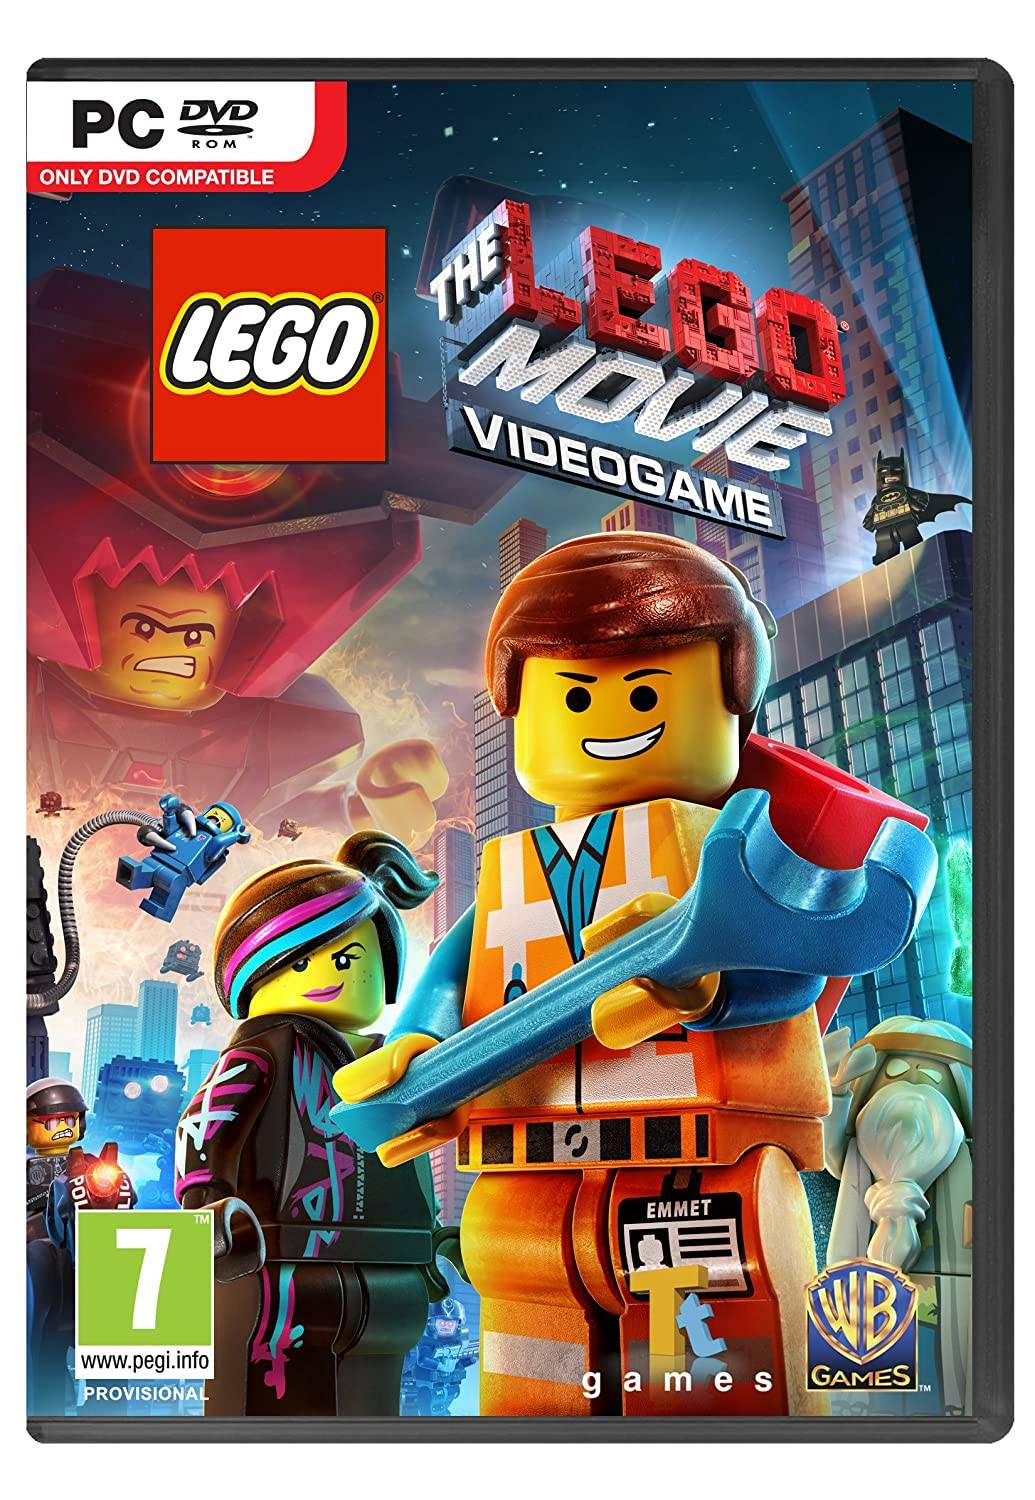 THE LEGO MOVIE VIDEOGAME 